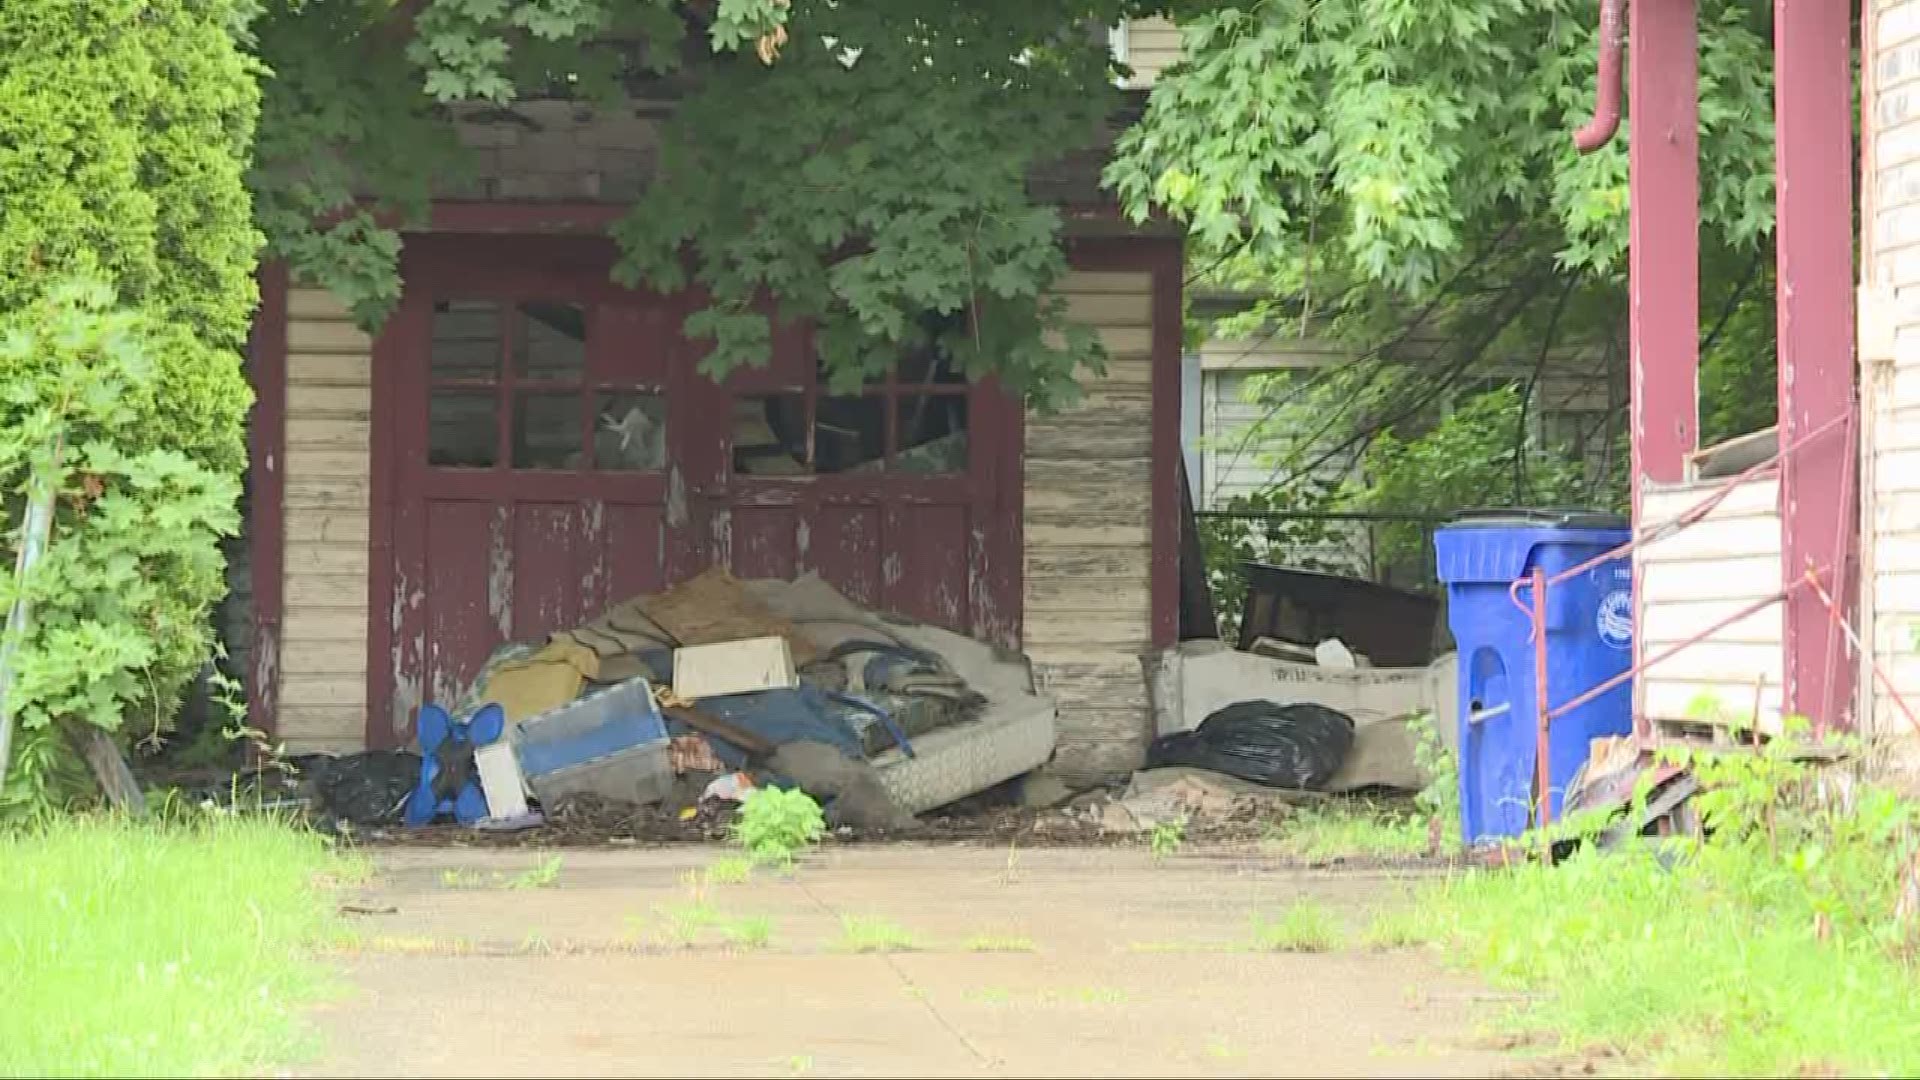 Cleveland Police investigating the death of woman found in vacant home with head trauma